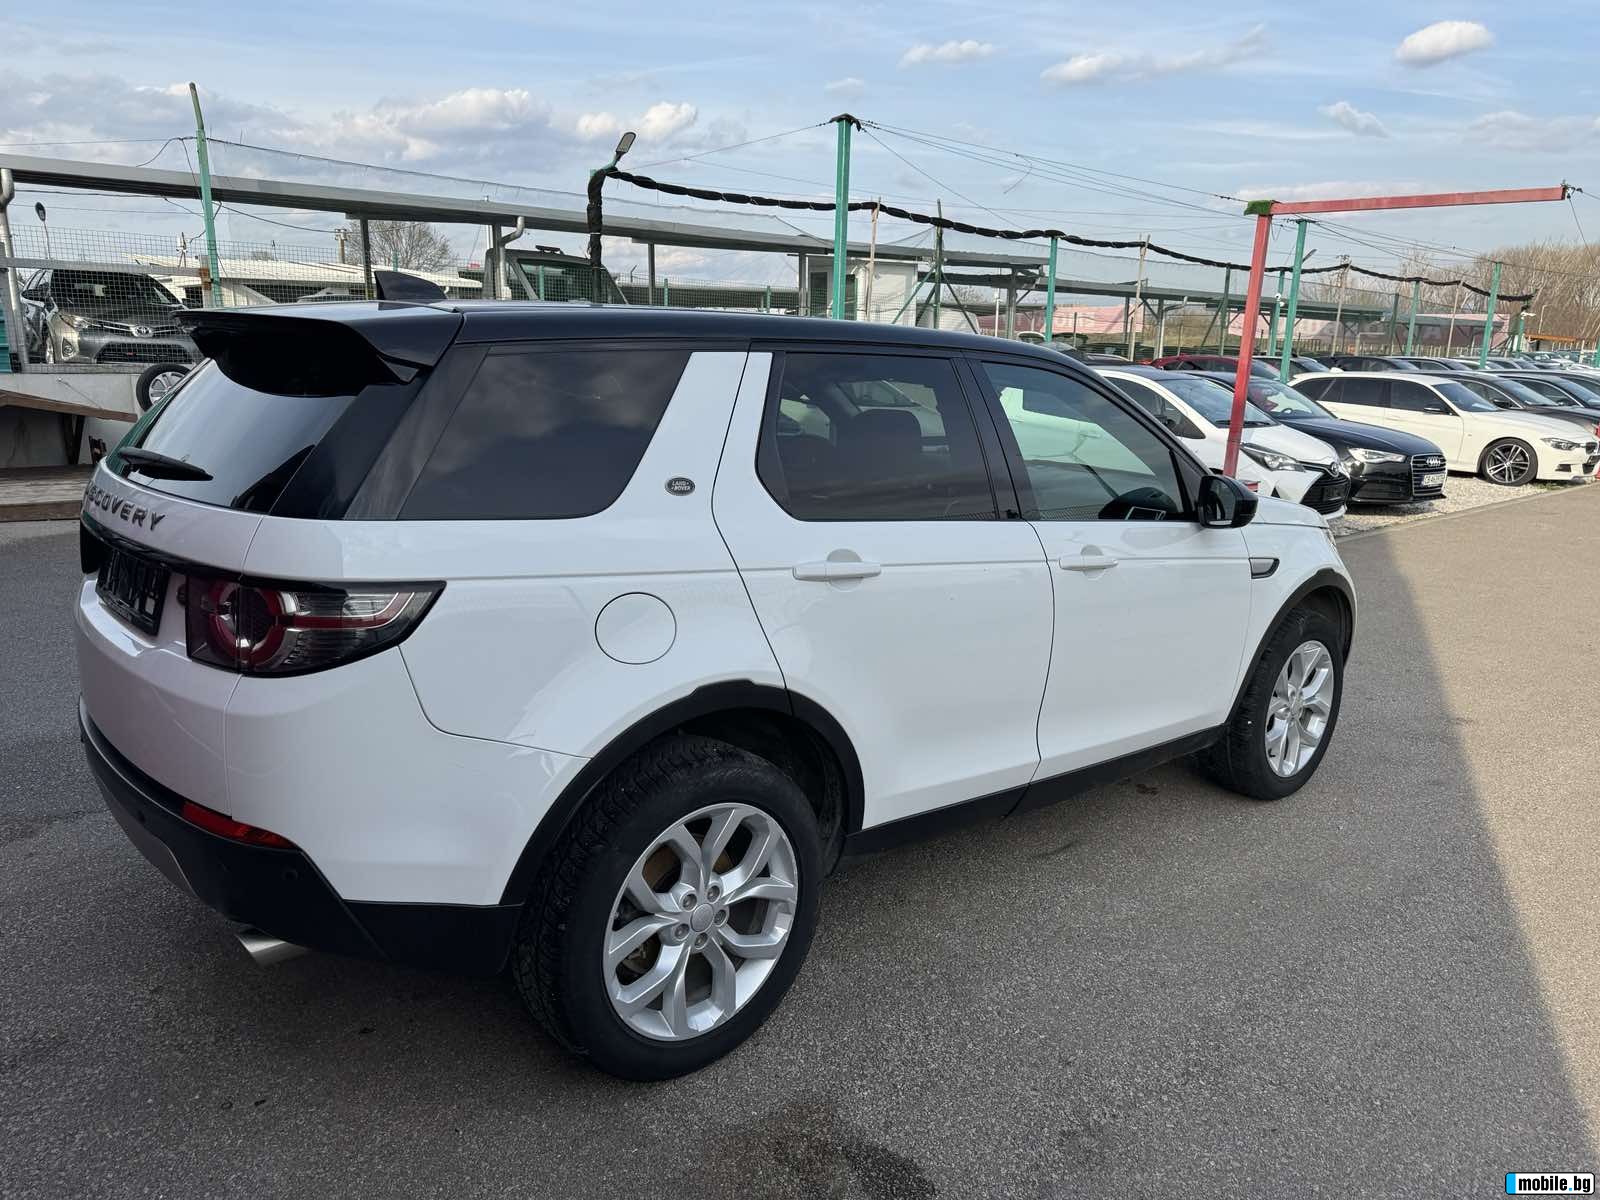 Land Rover Discovery SPORT | Mobile.bg   7